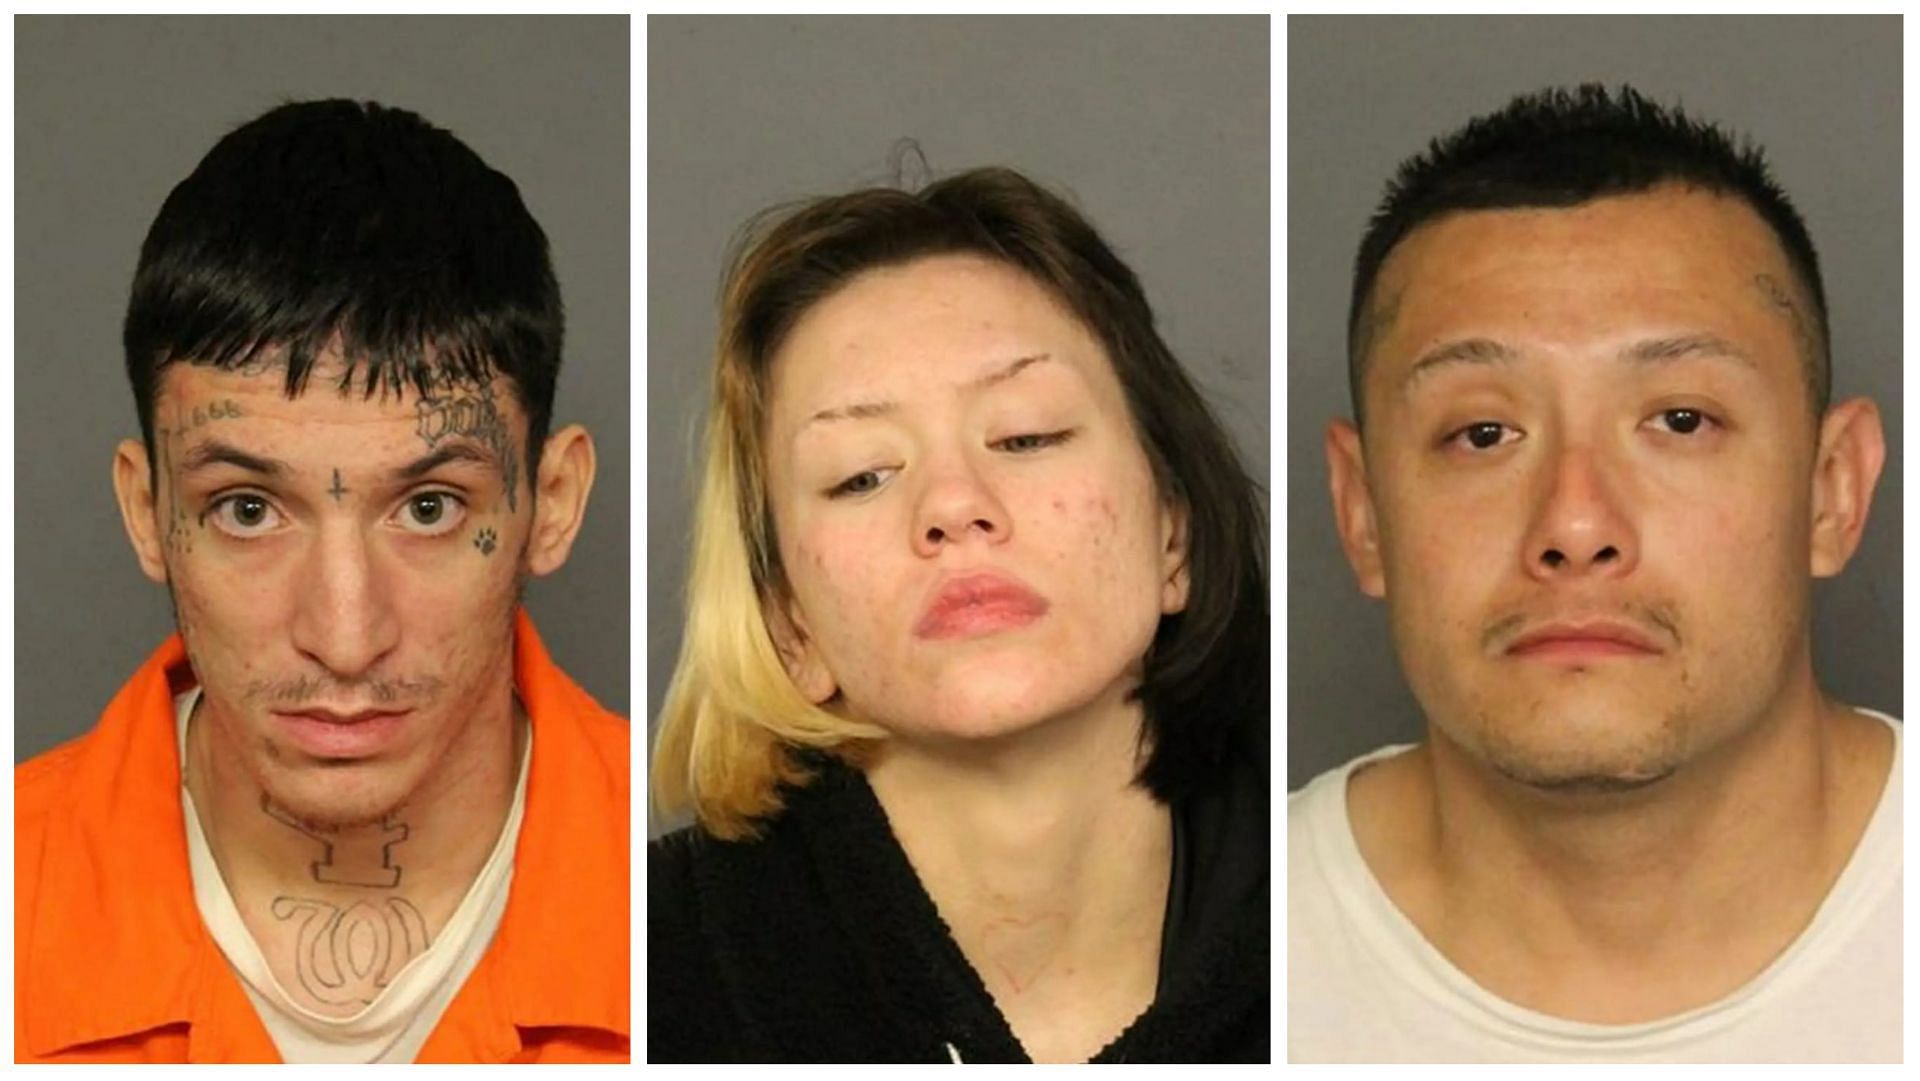 (from left) Robert Adam Solano, Shiloh Fresquez, and Joseph Thomas Chavez are the suspects arrested for the alleged murder of Jasmine. (Images from City and County of Denver)